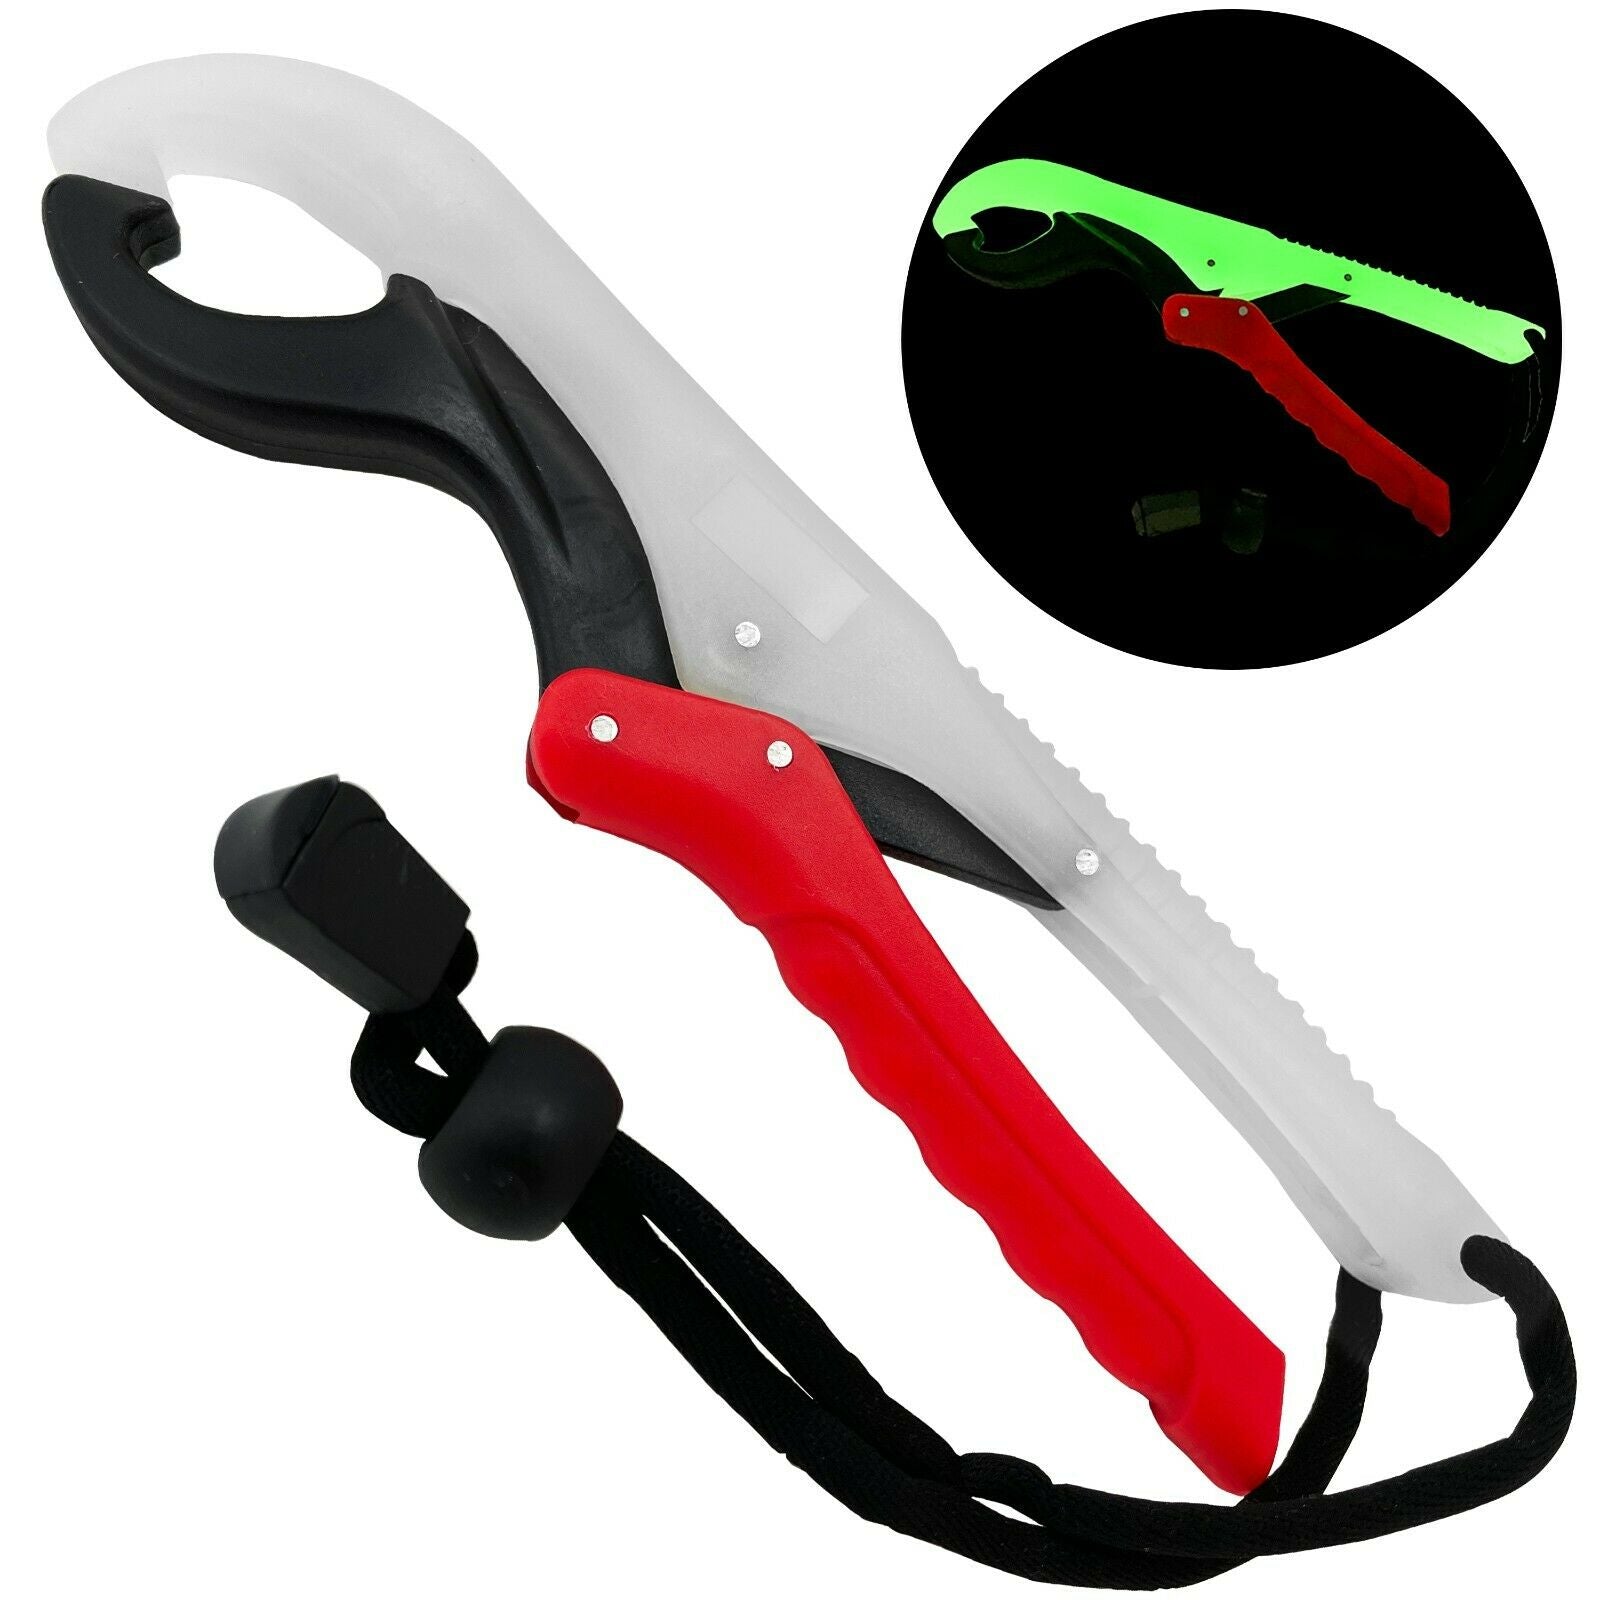 UFISH - Heavy Duty fishing line cutter, fishing clippers for fishing line